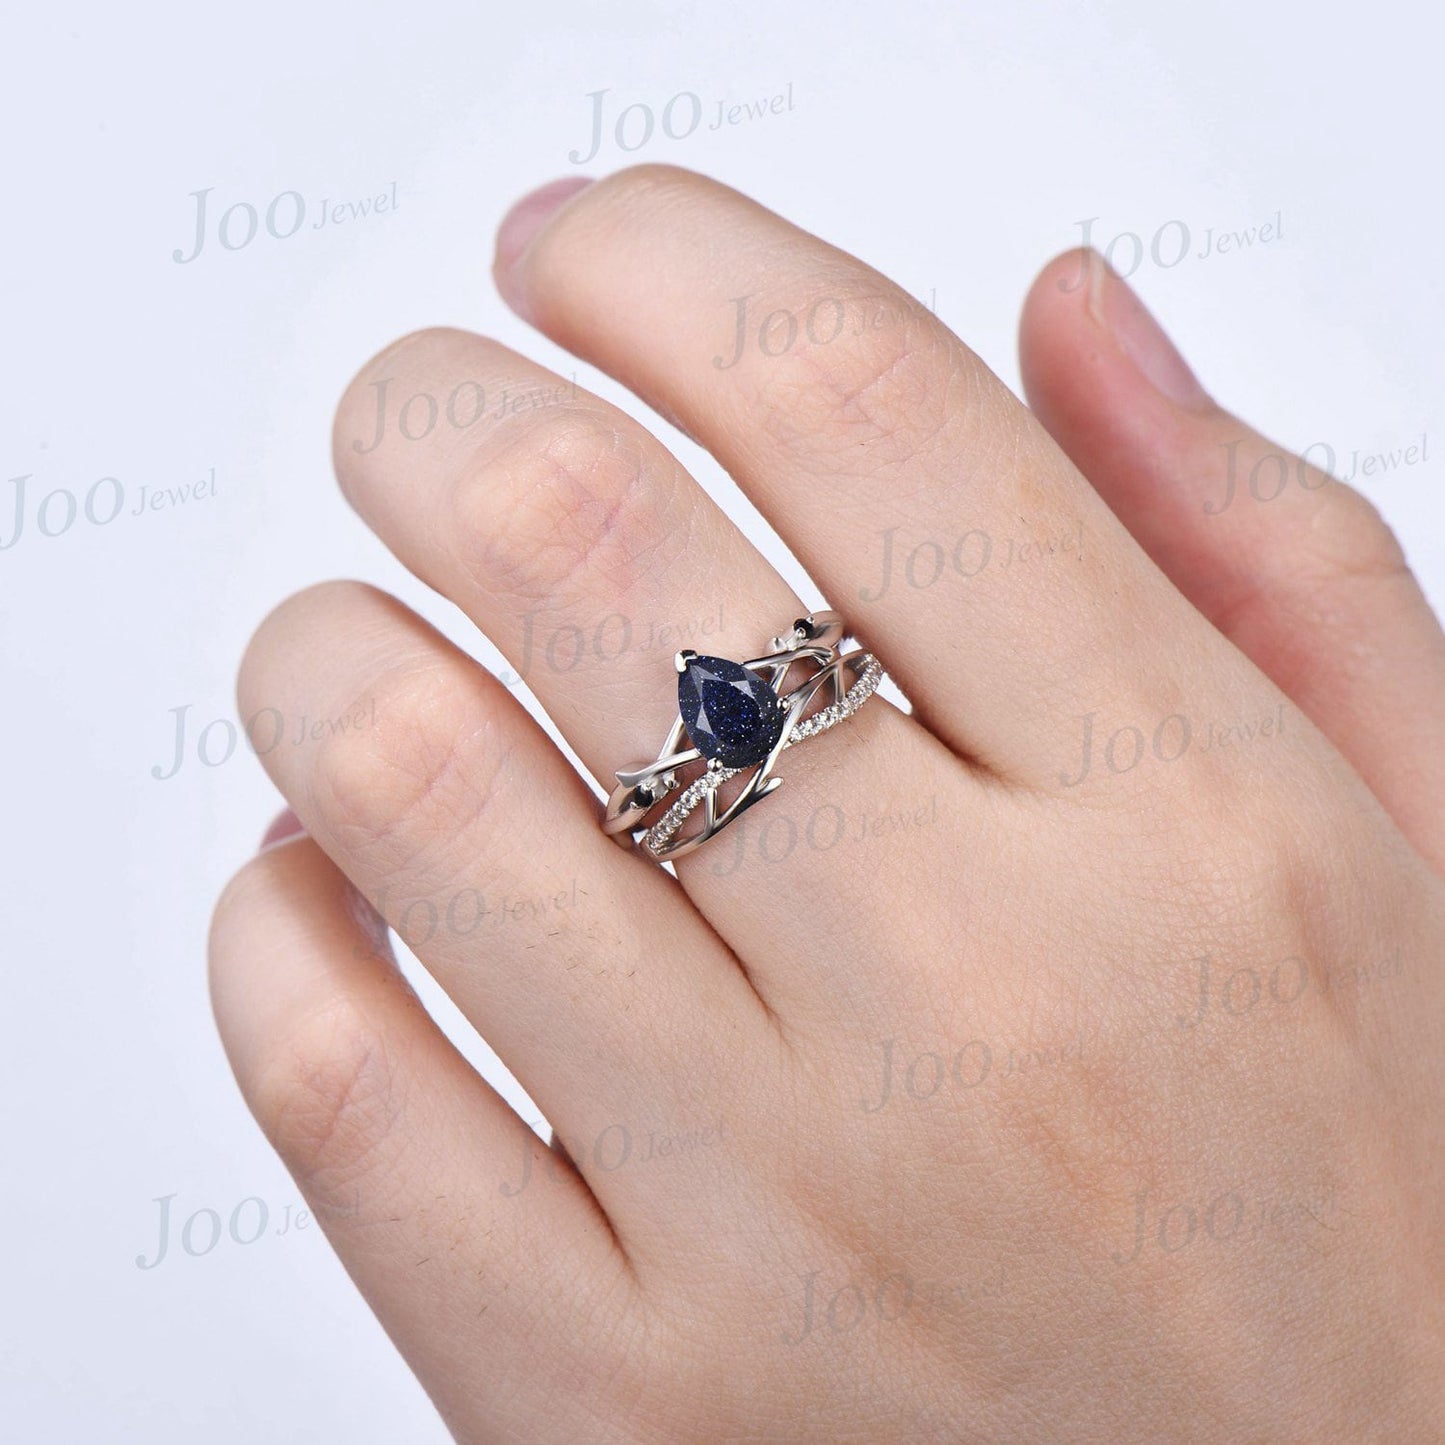 1.25ct Pear Shaped Blue Sandstone Ring White Gold Twig Engagement Ring Set Galaxy Starry Sky Ring Unique Blue Gemstone Jewelry Proposal Gift